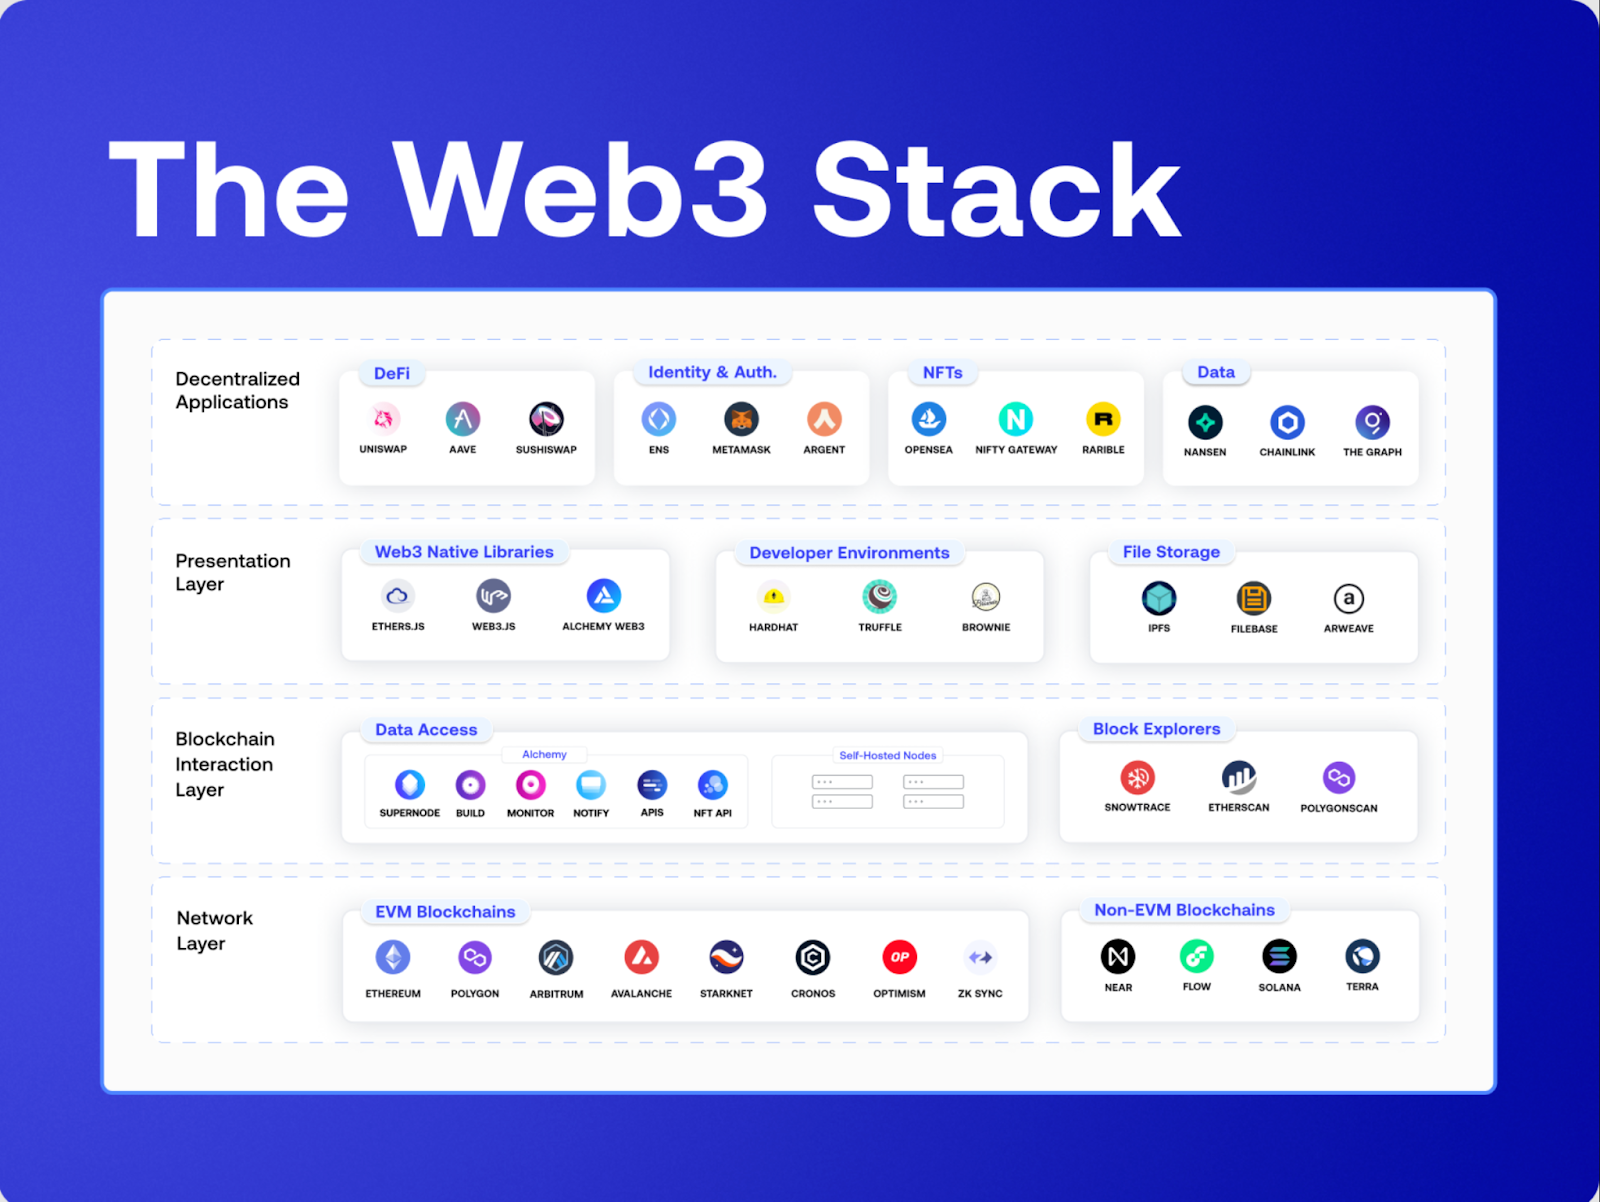 The Web3 Stack